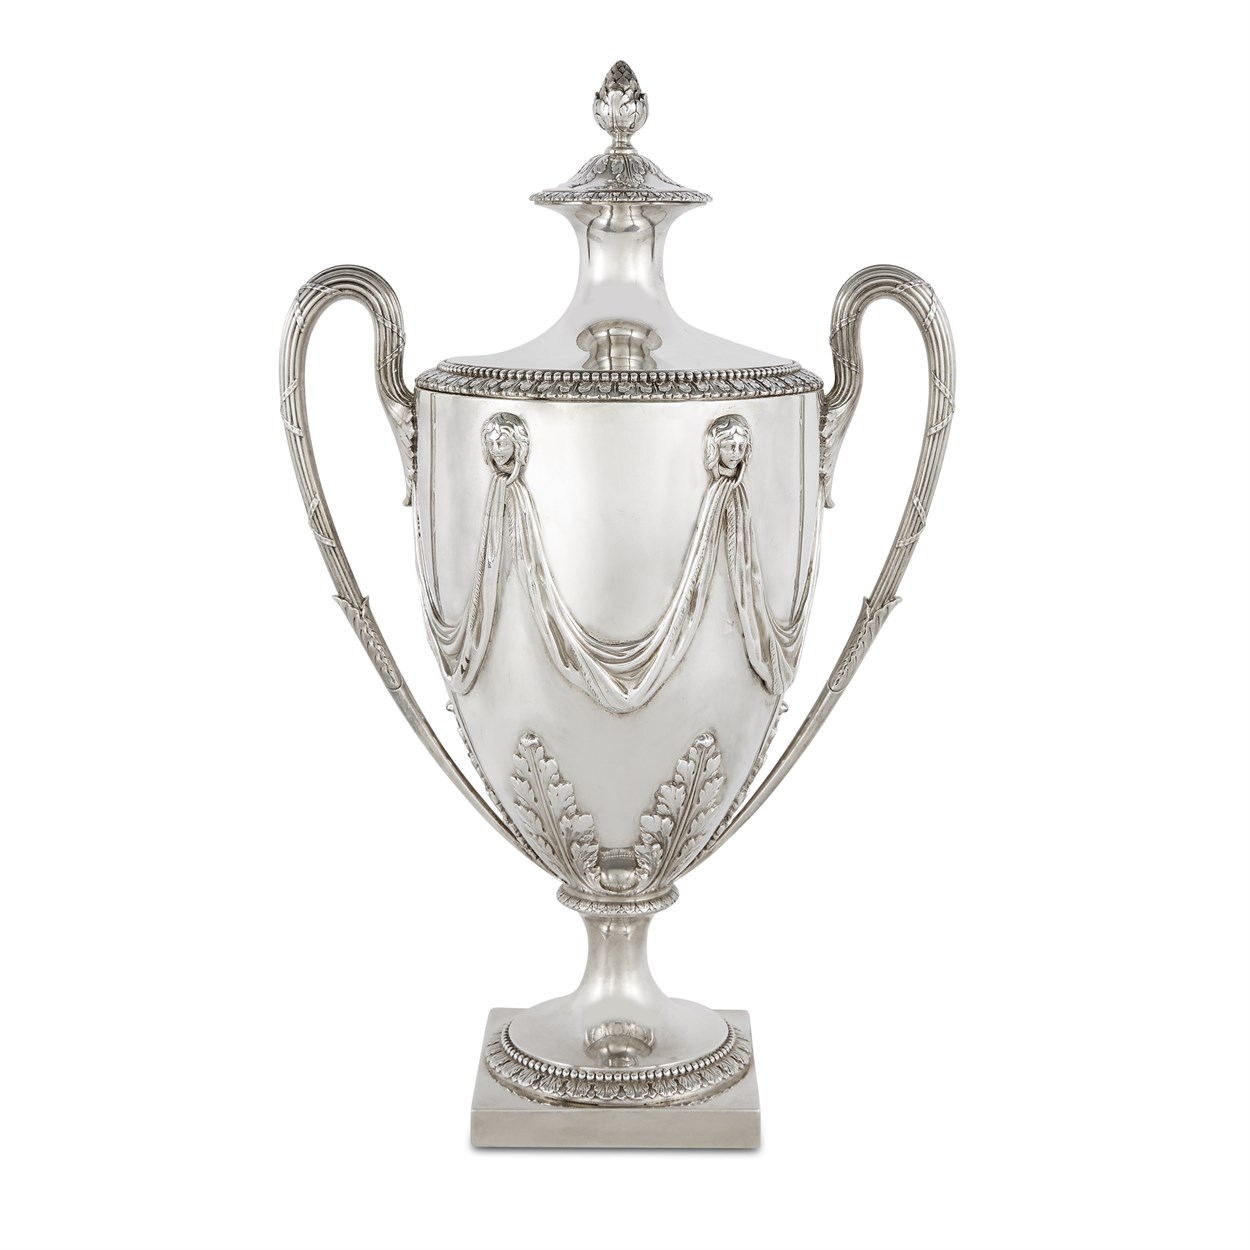 Lot 50 - A large George III silver two-handled cup and cover